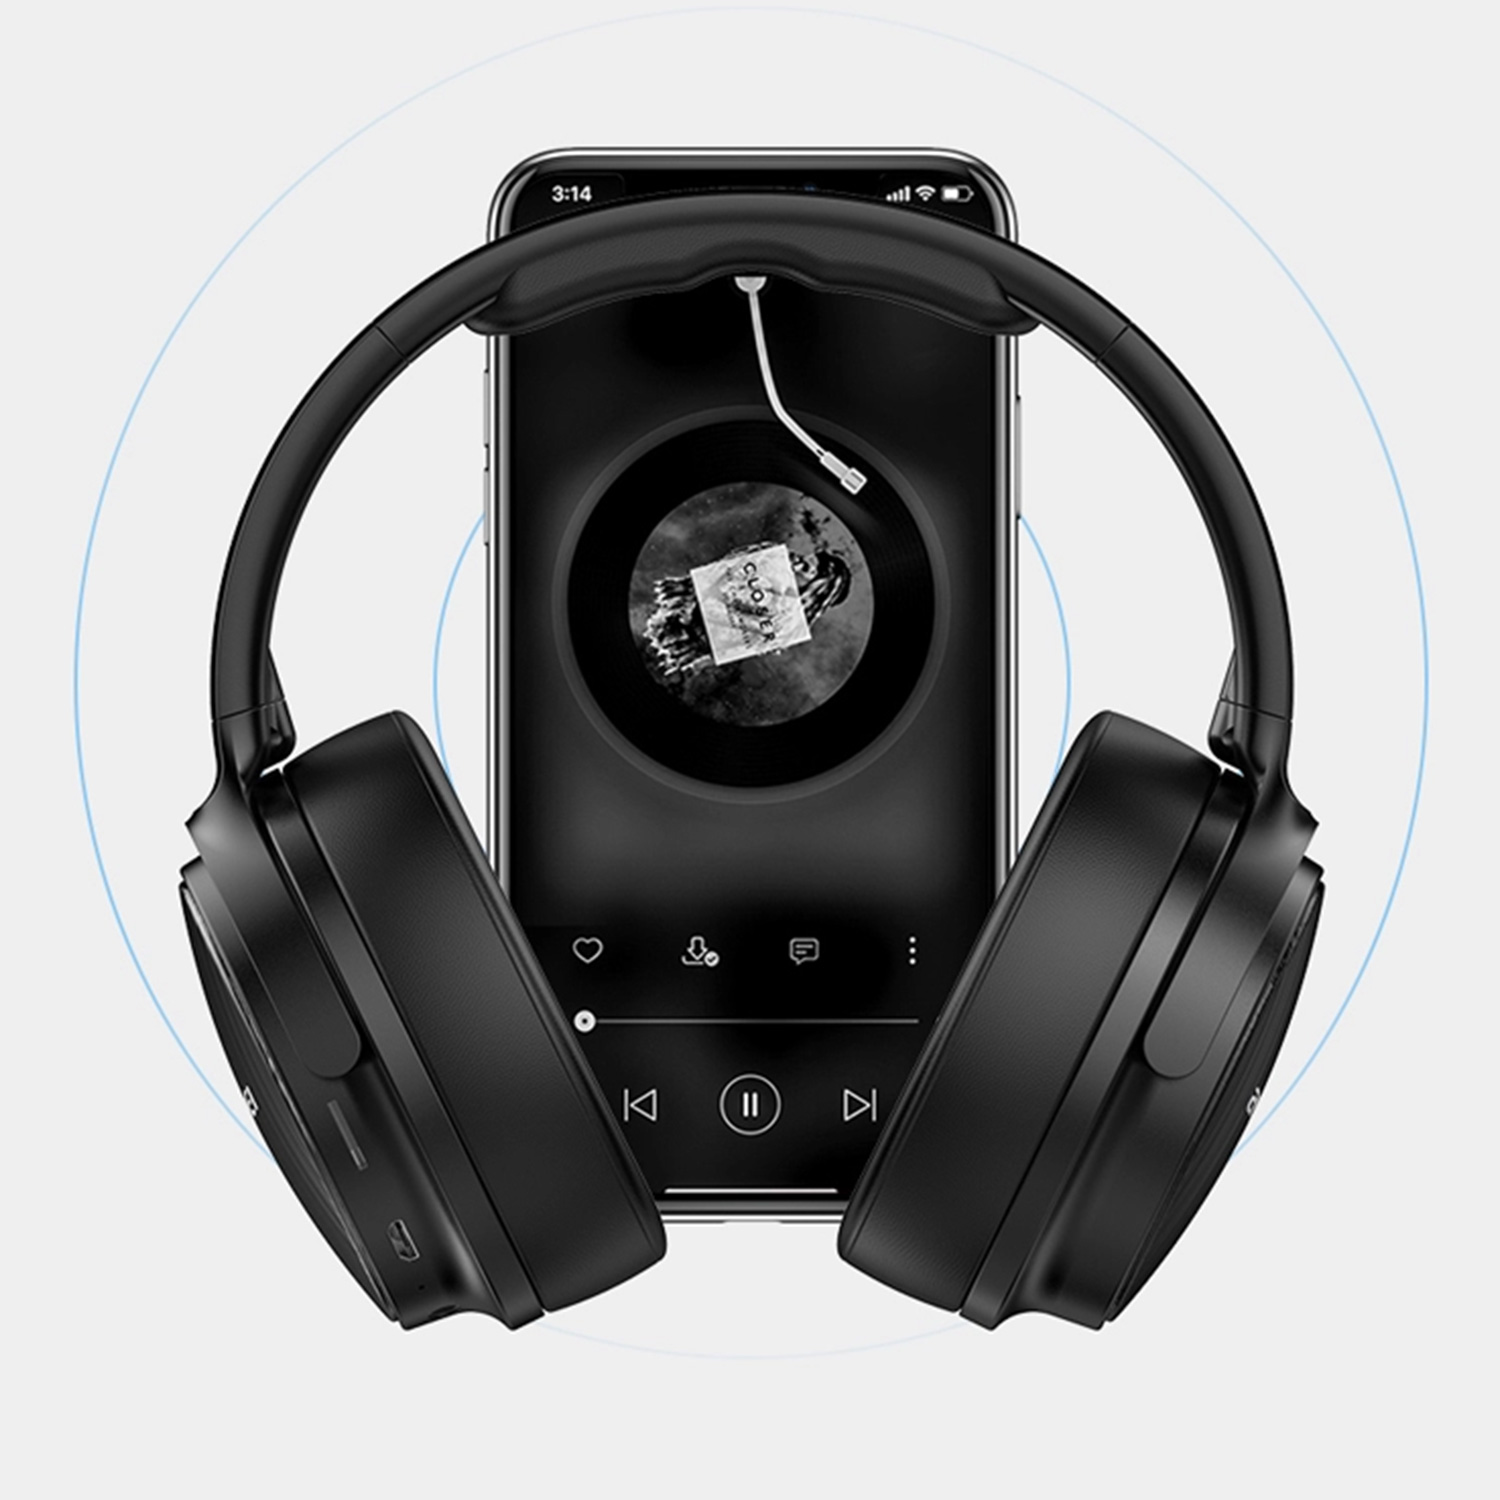 Function buttons in the headphone housing